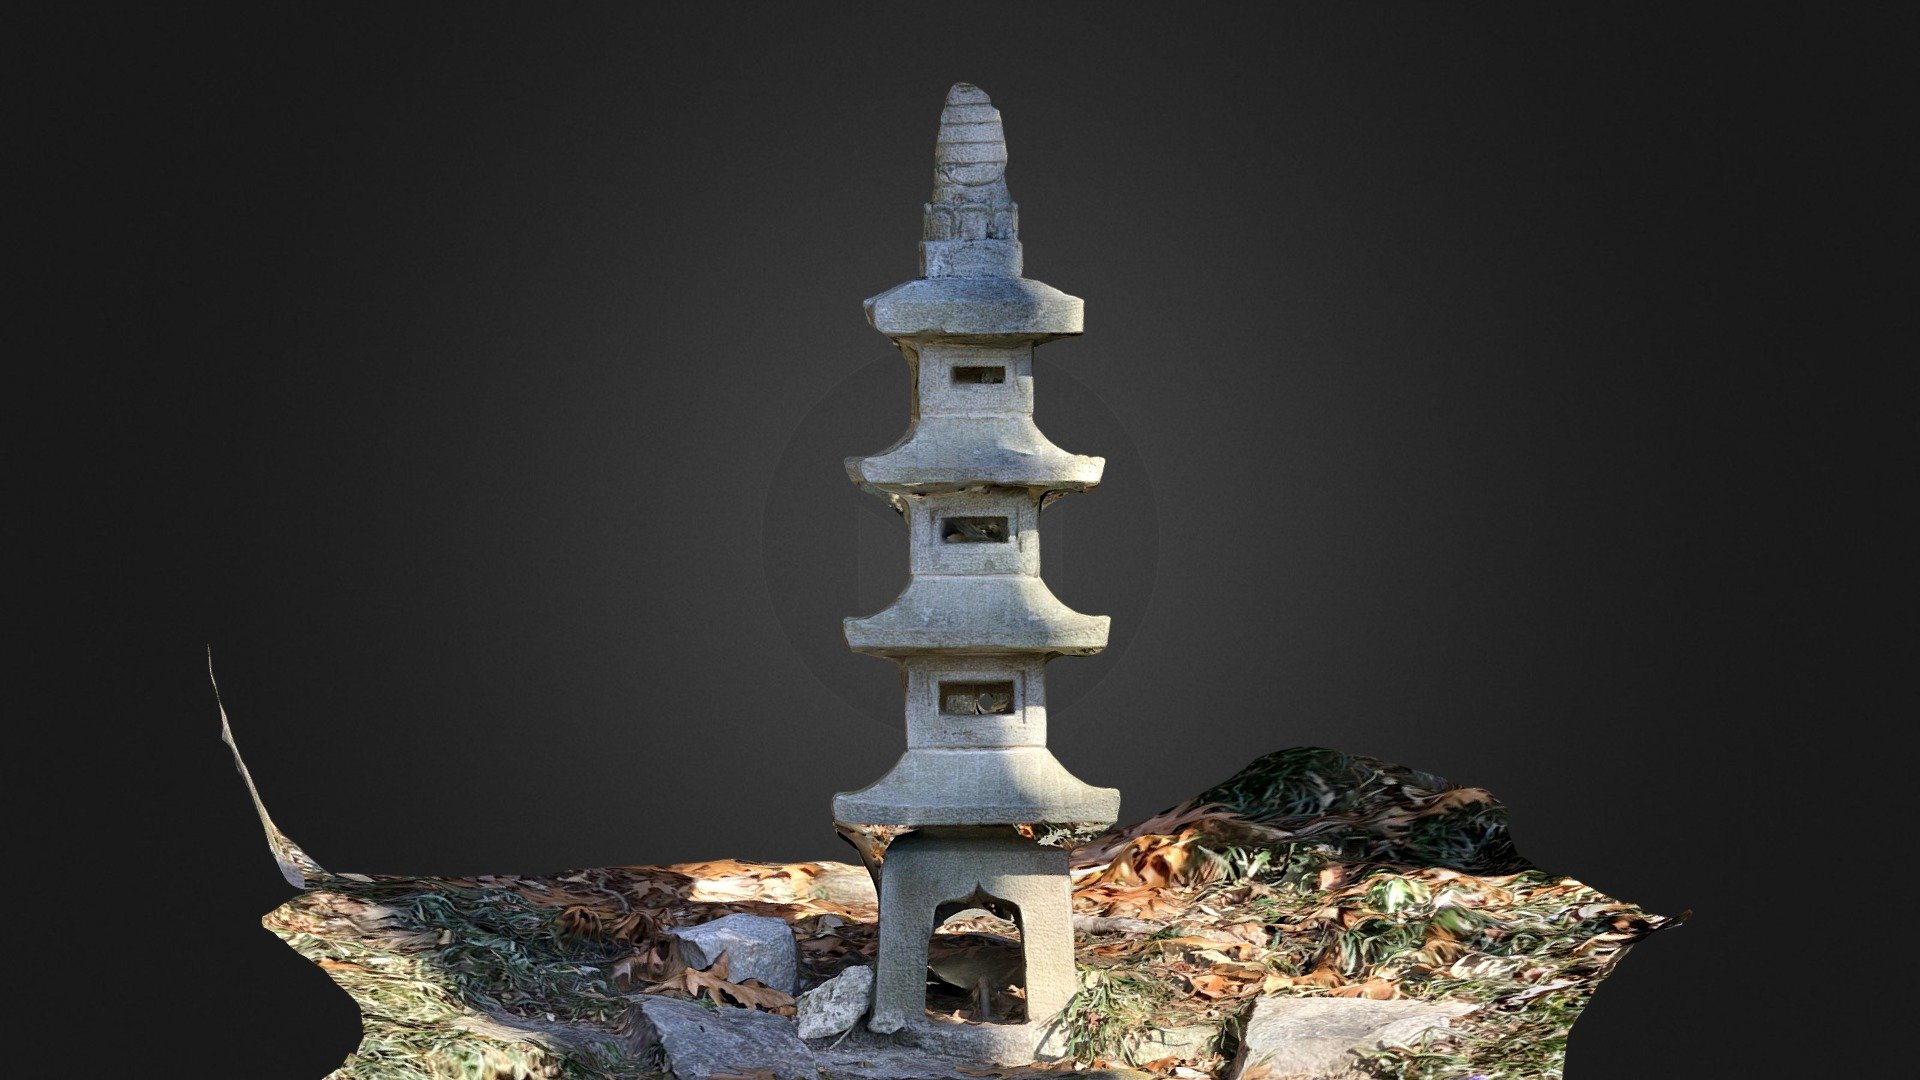 Pagoda lantern in the Japanese Gardens at the Maymont in Richmond, VA. Scanned with TRNIO plus beta in ARKit mode on a 6th gen ipad 3d model